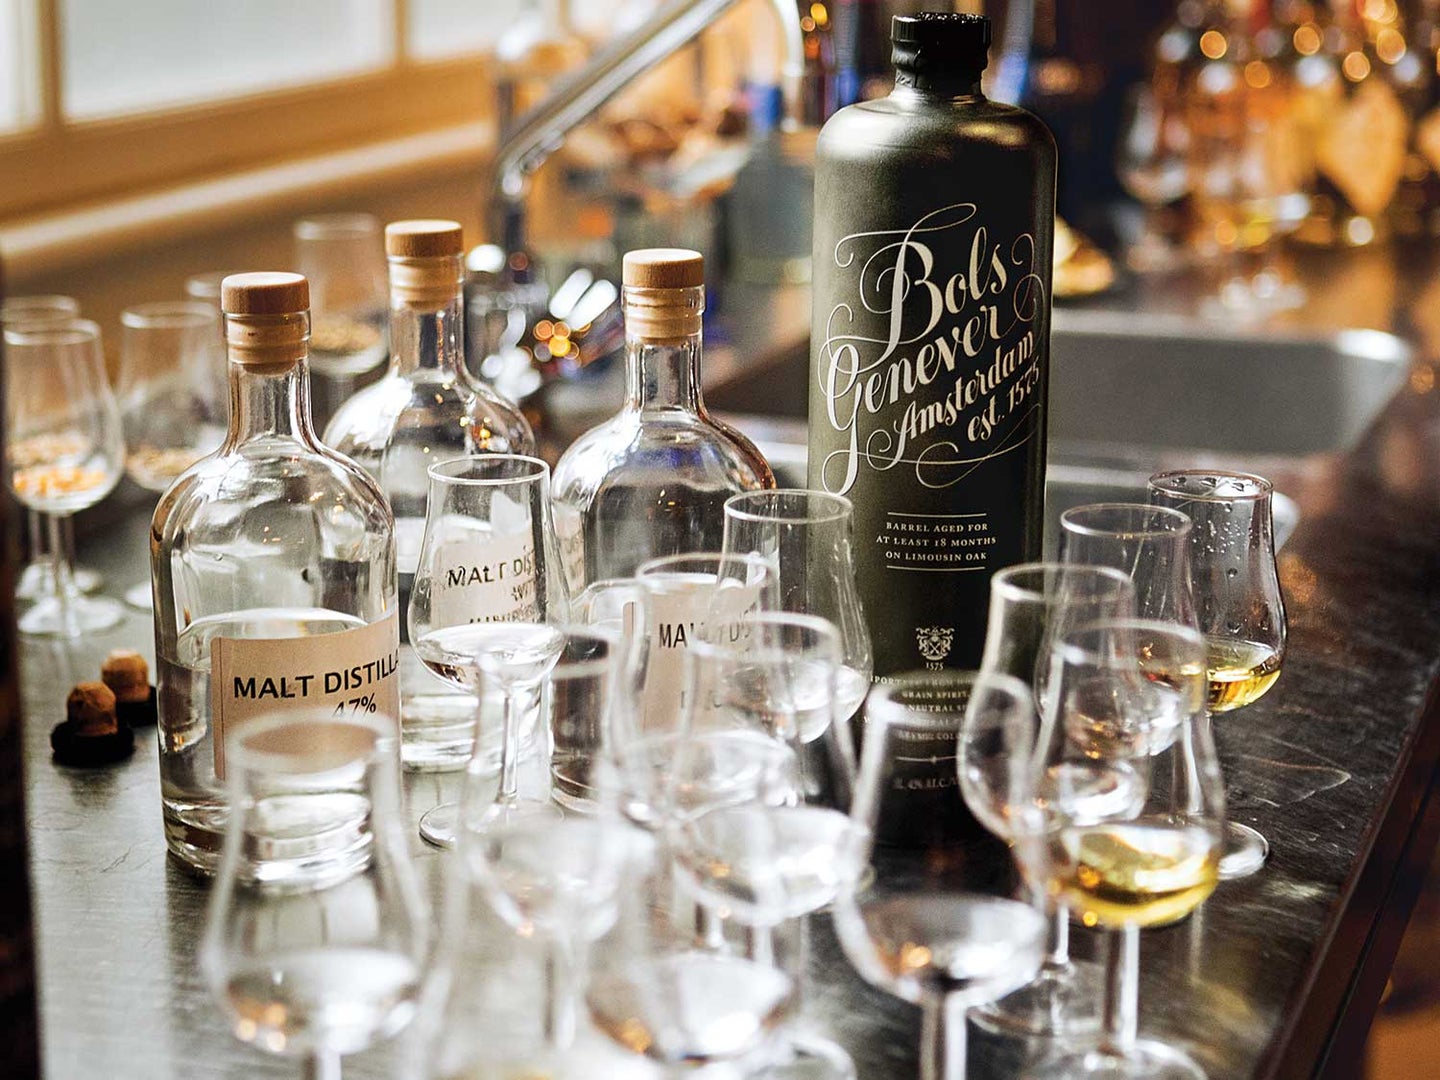 A bottle of Bols genever sits amid base spirits at the 355-year-old Amsterdam distillery.